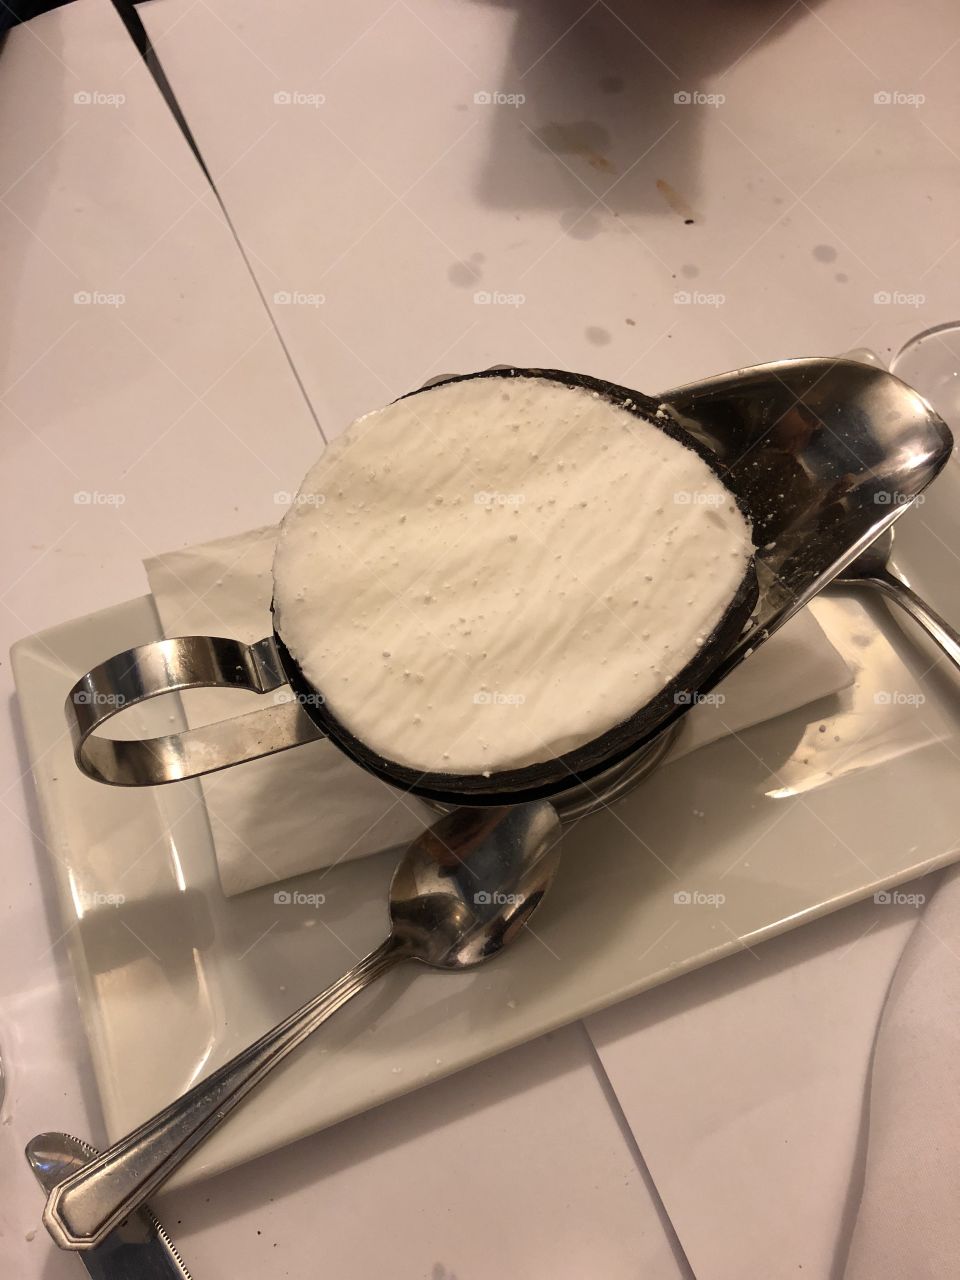 Coconut sorbet in the shell